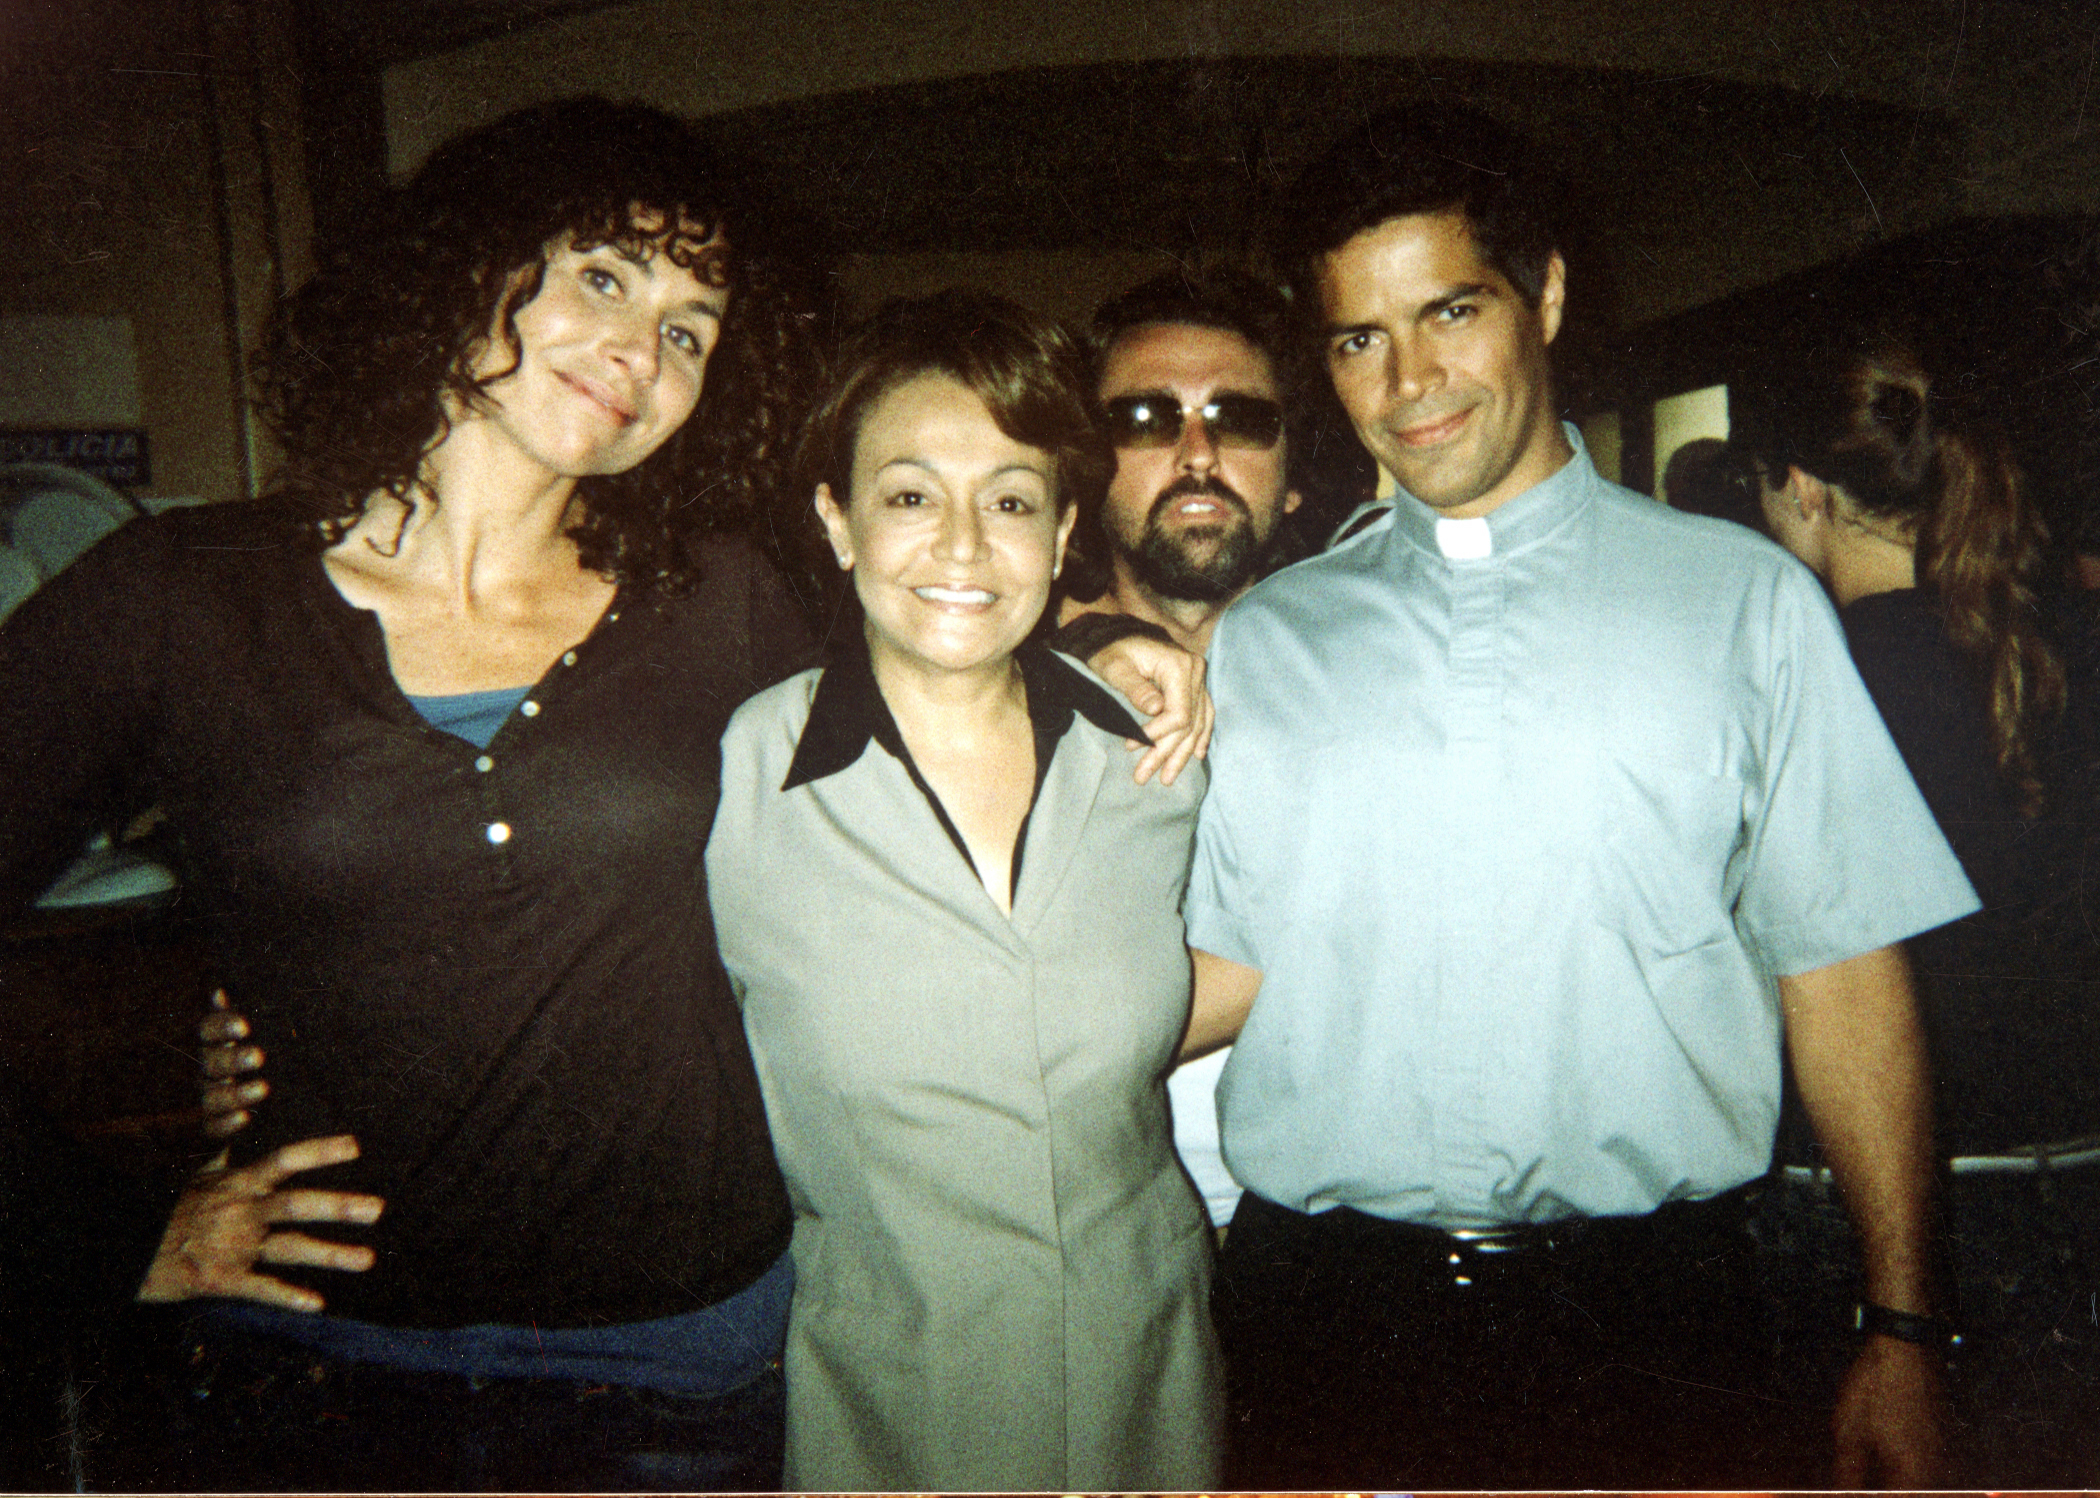 Working with Minnie Driver, Esai Morales and Angus Macfadyen